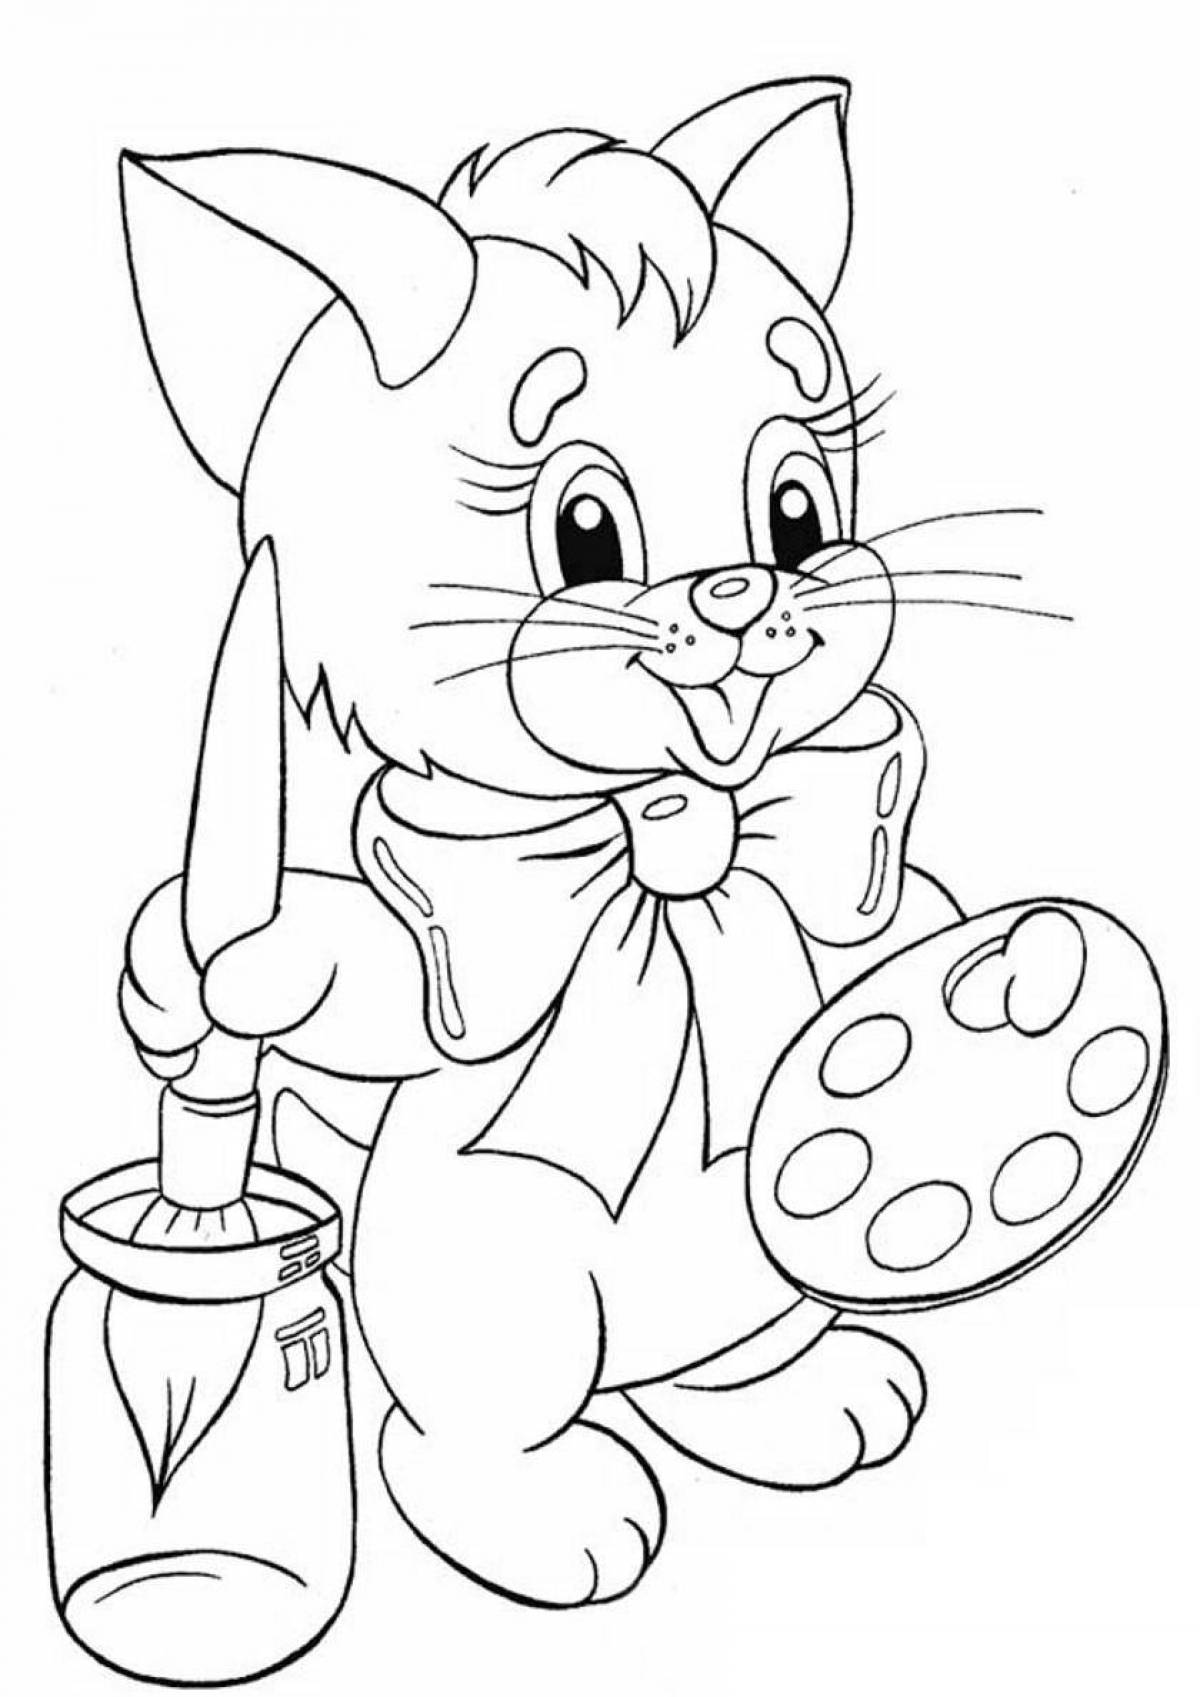 Cute kitty coloring book for 4-5 year olds